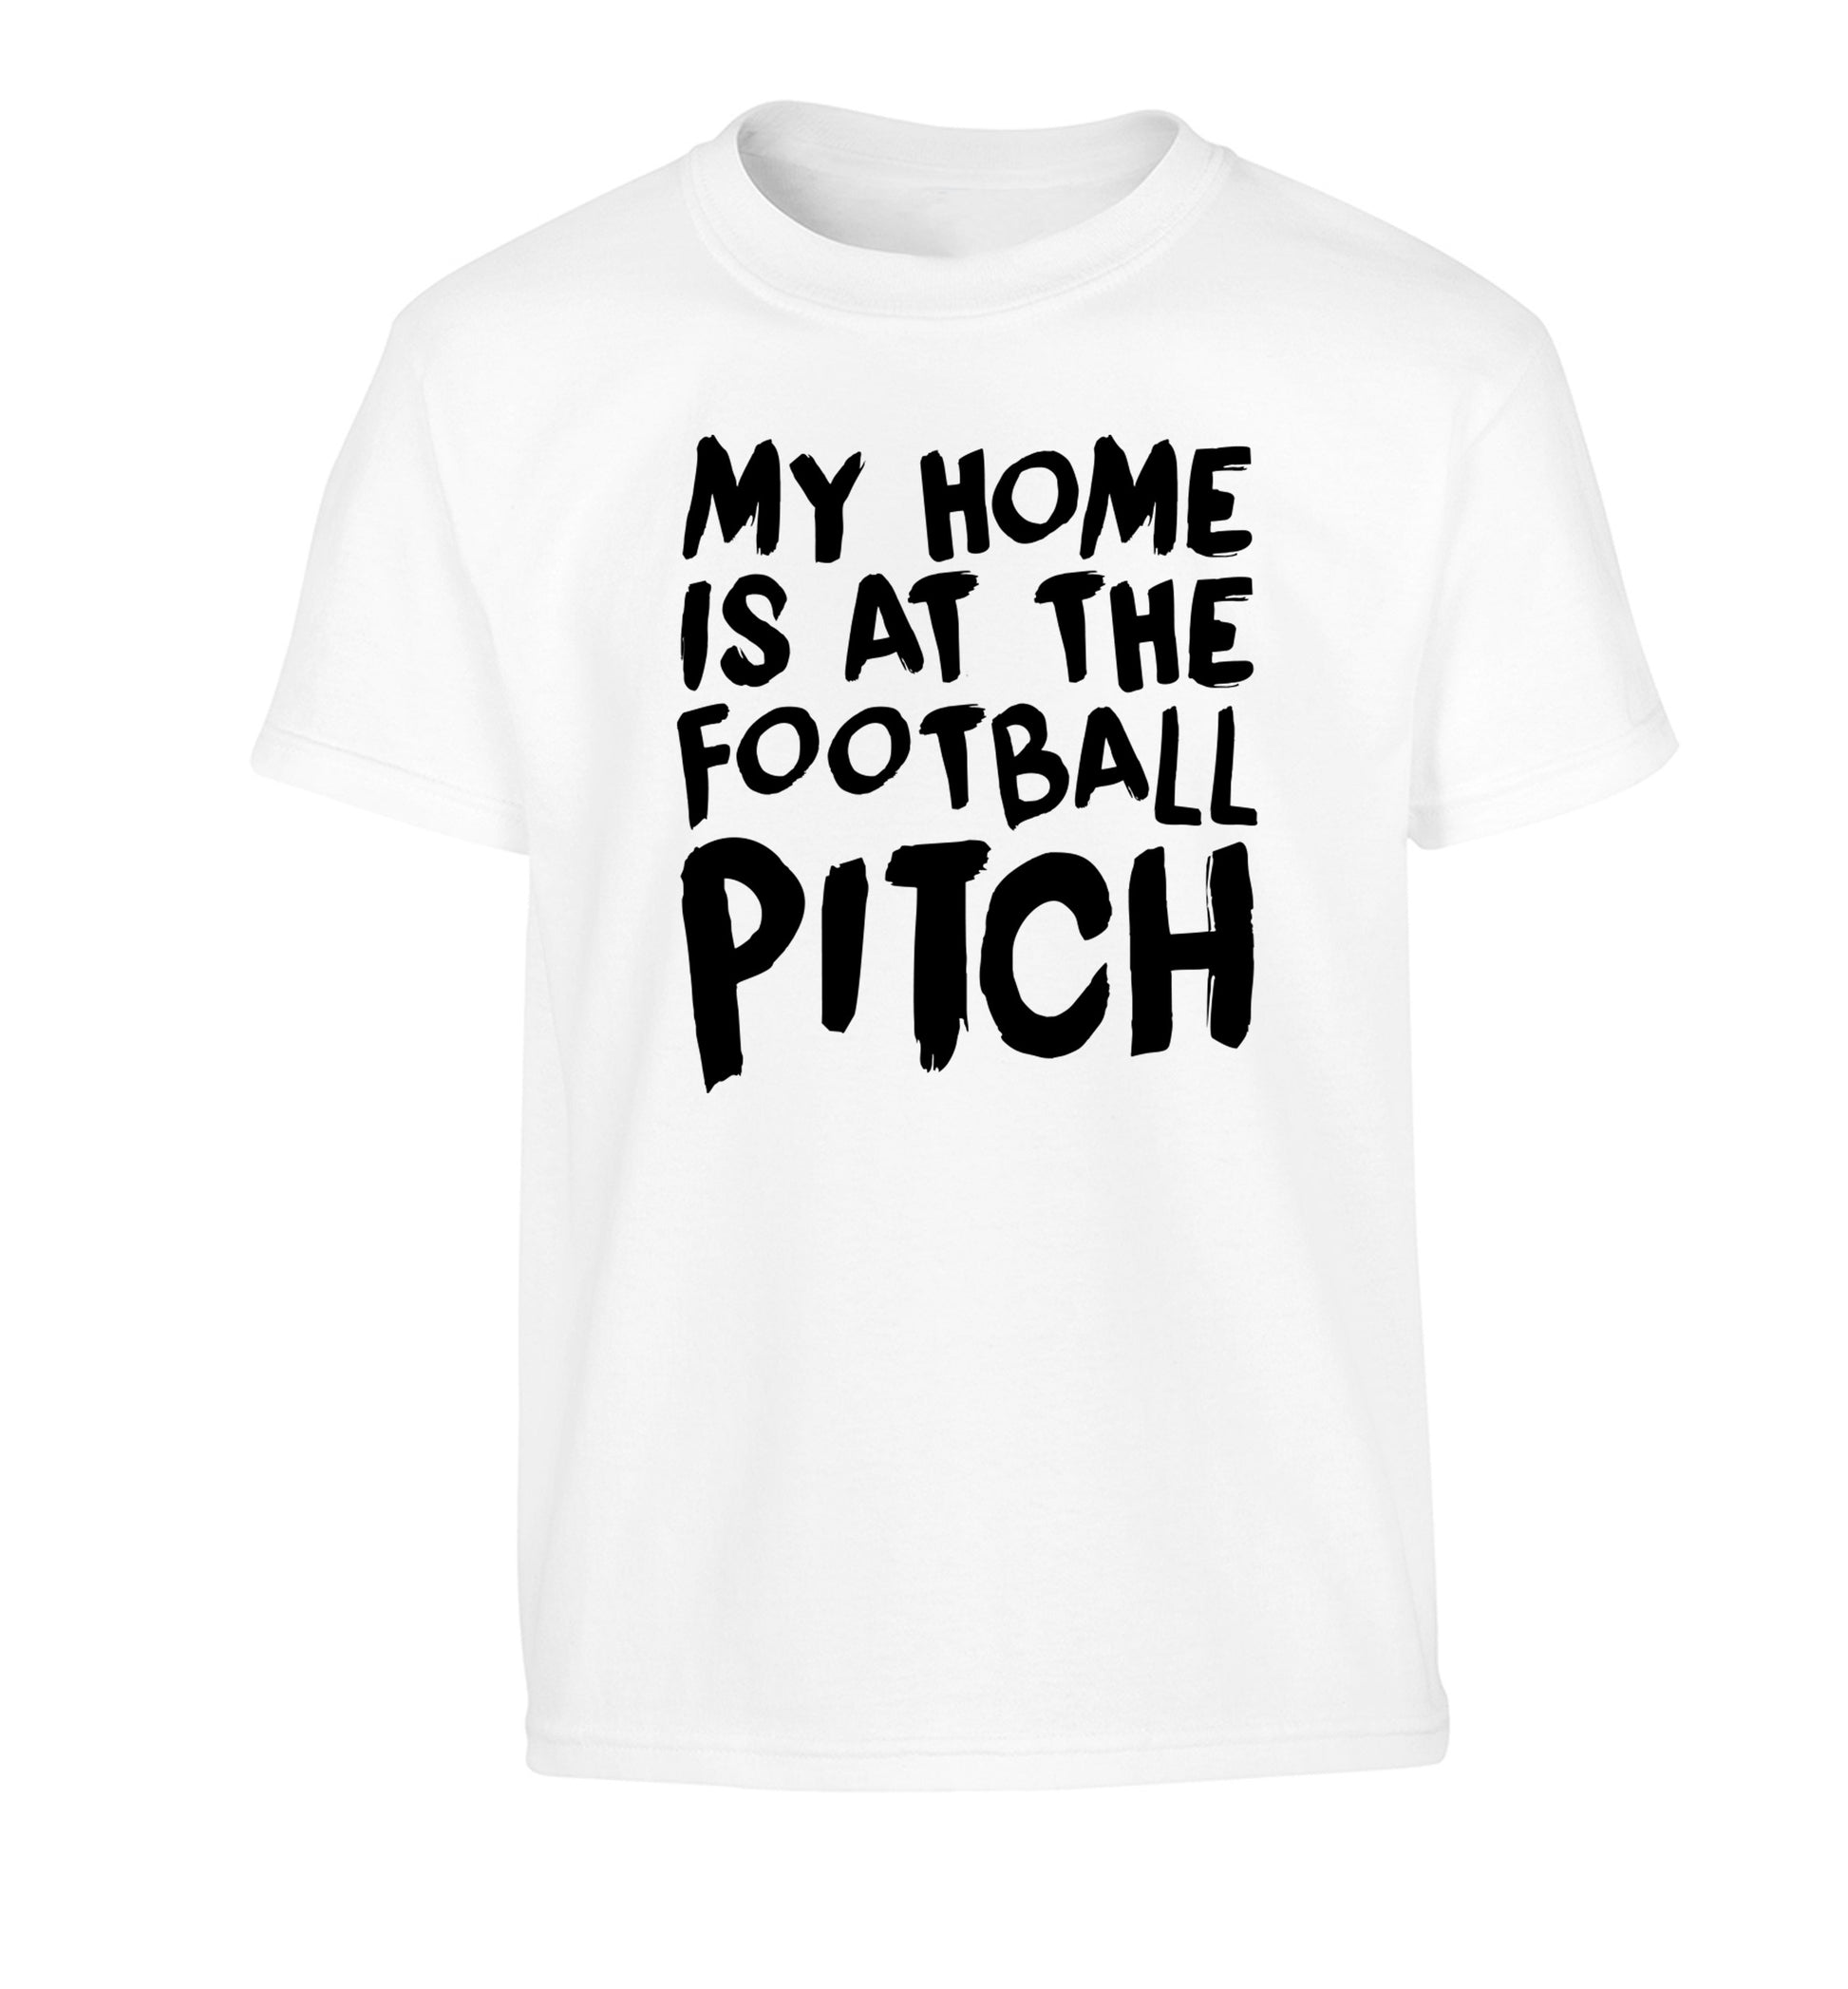 My home is at the football pitch Children's white Tshirt 12-14 Years